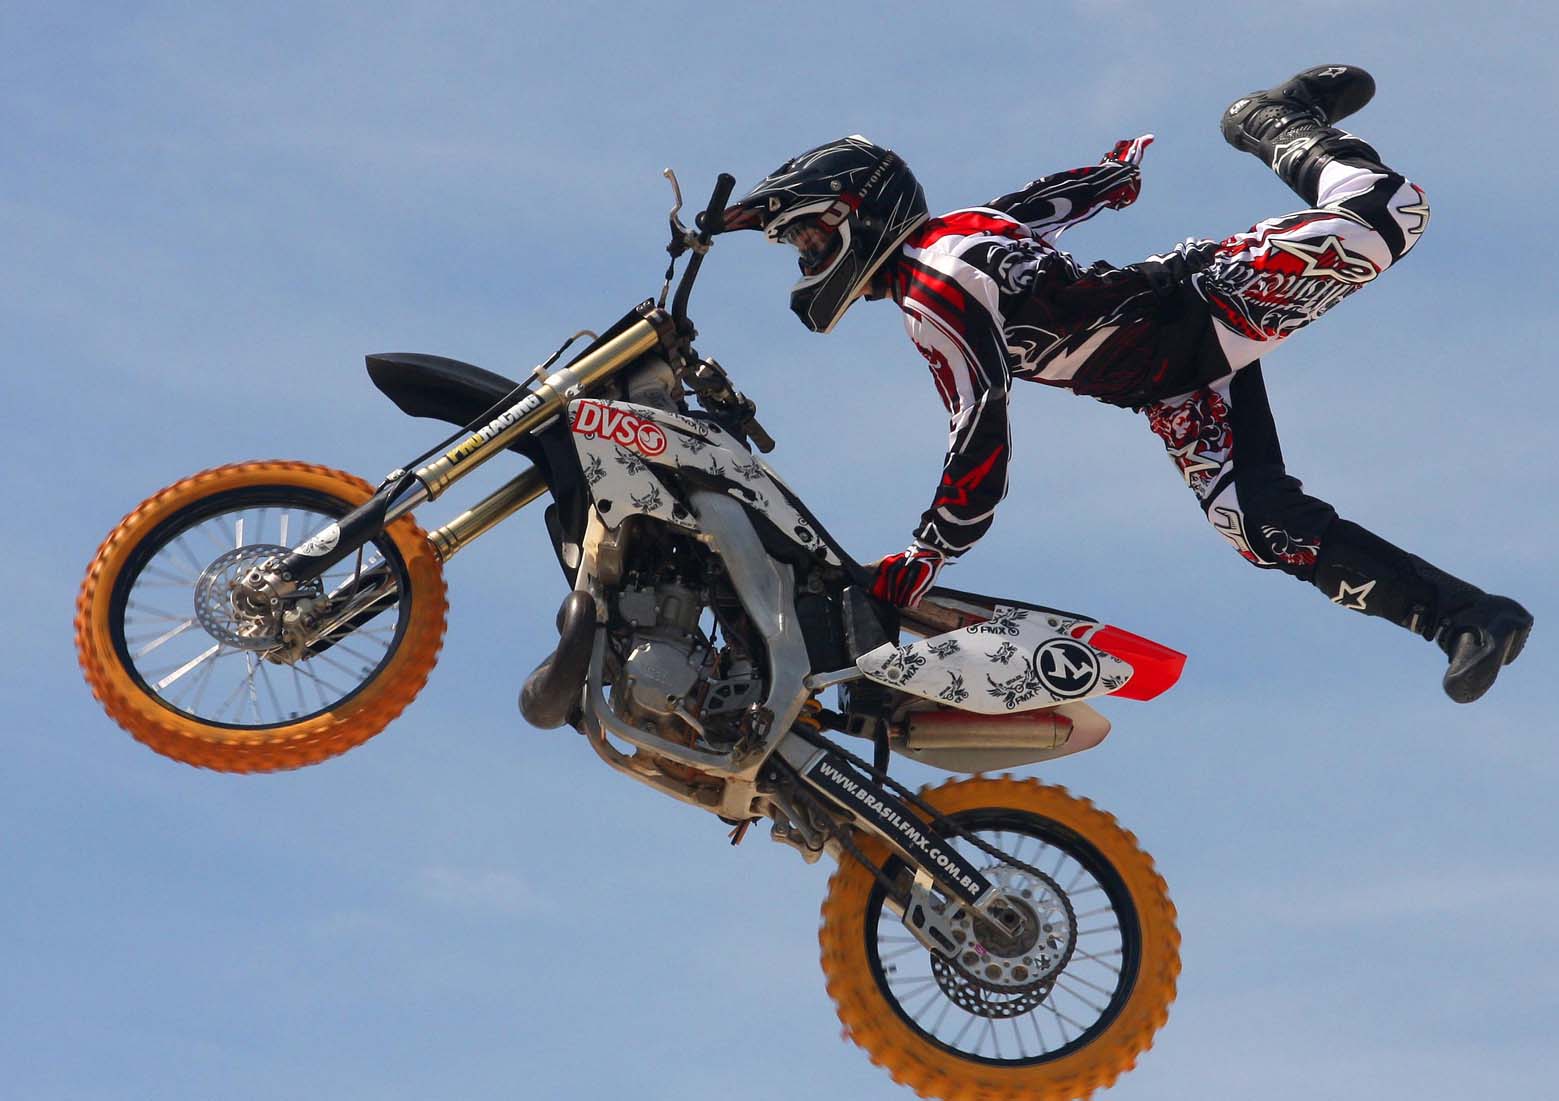 Freestyle motocross pictures - Diverse Information